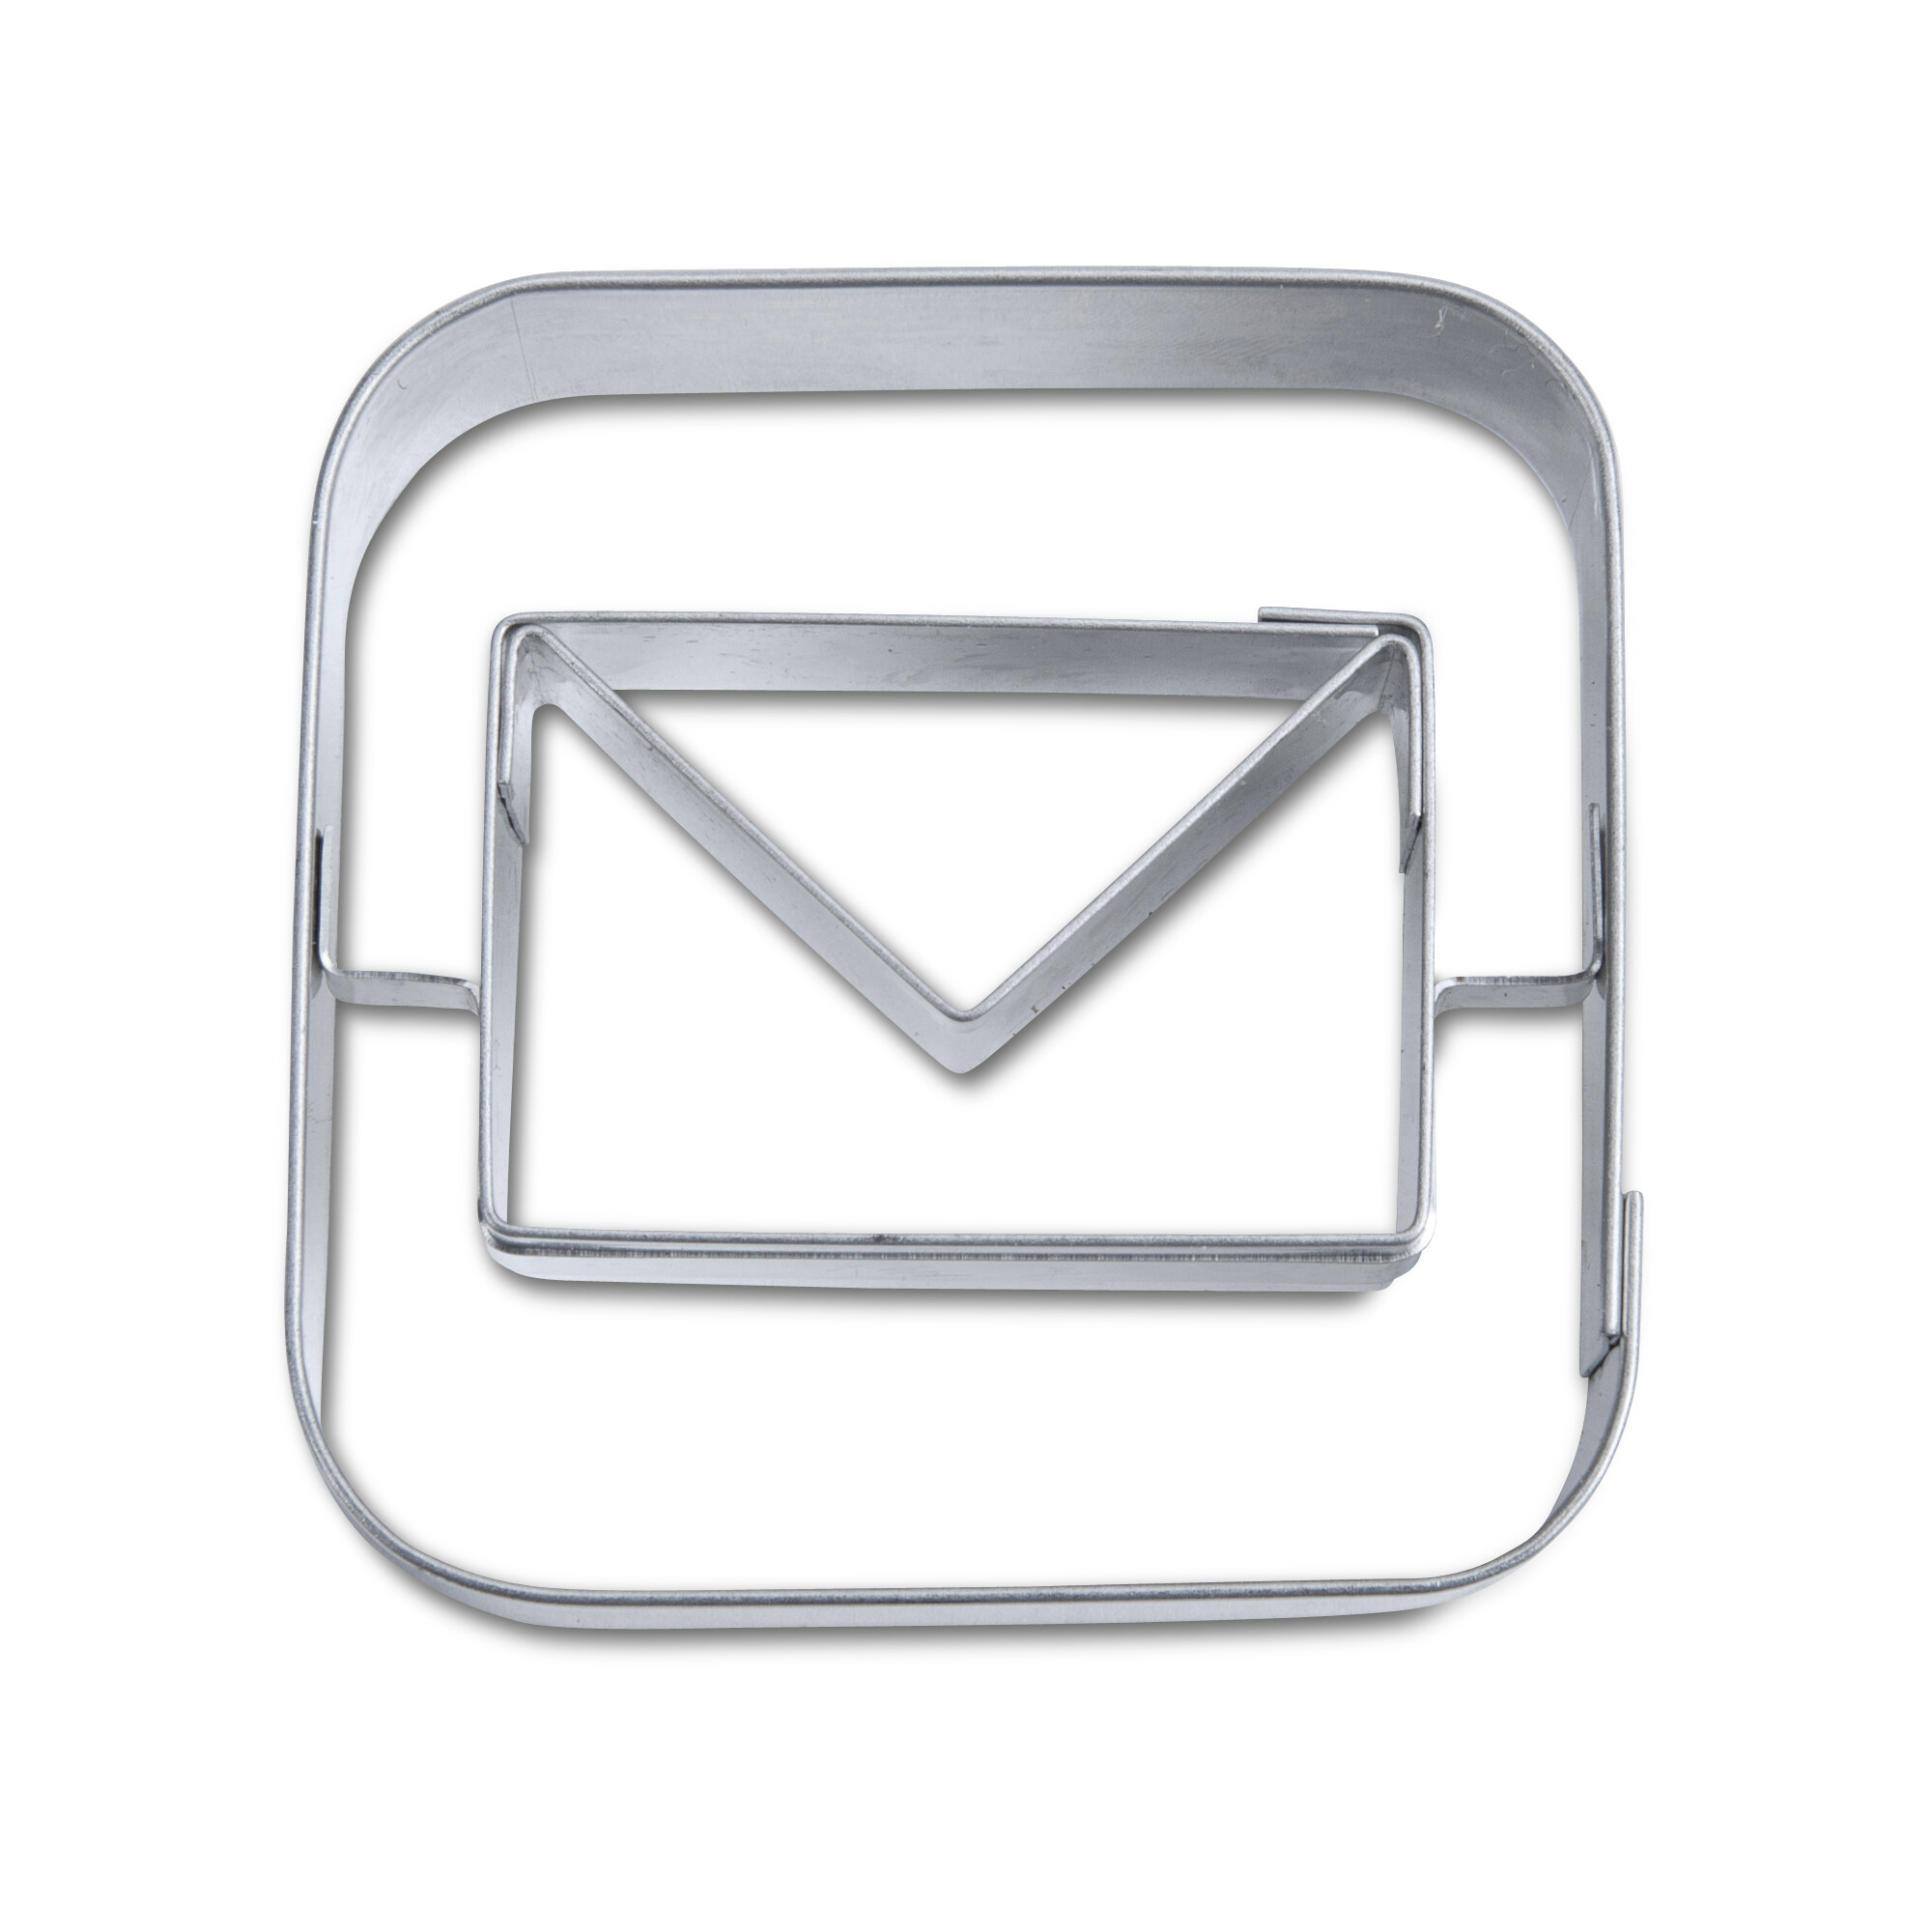 Cookie cutter with stamp – App-Cutter mail